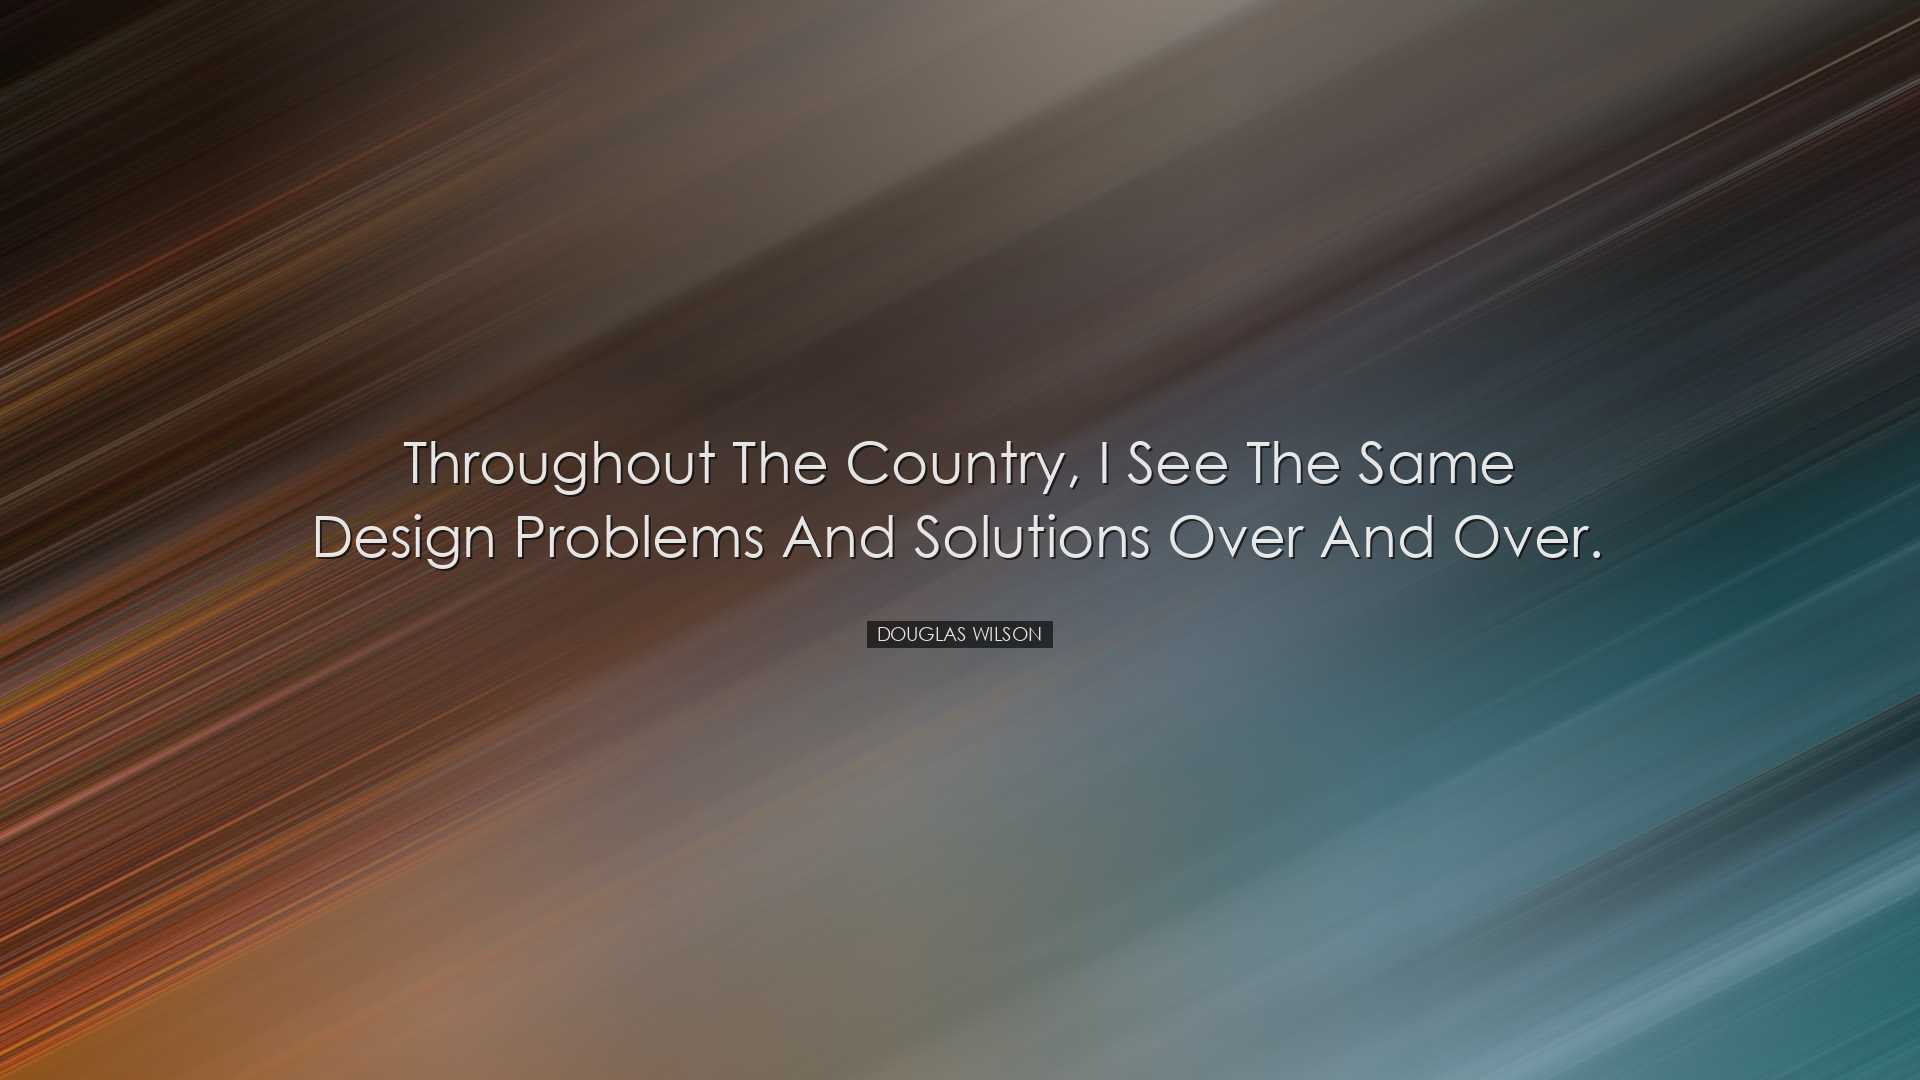 Throughout the country, I see the same design problems and solutio